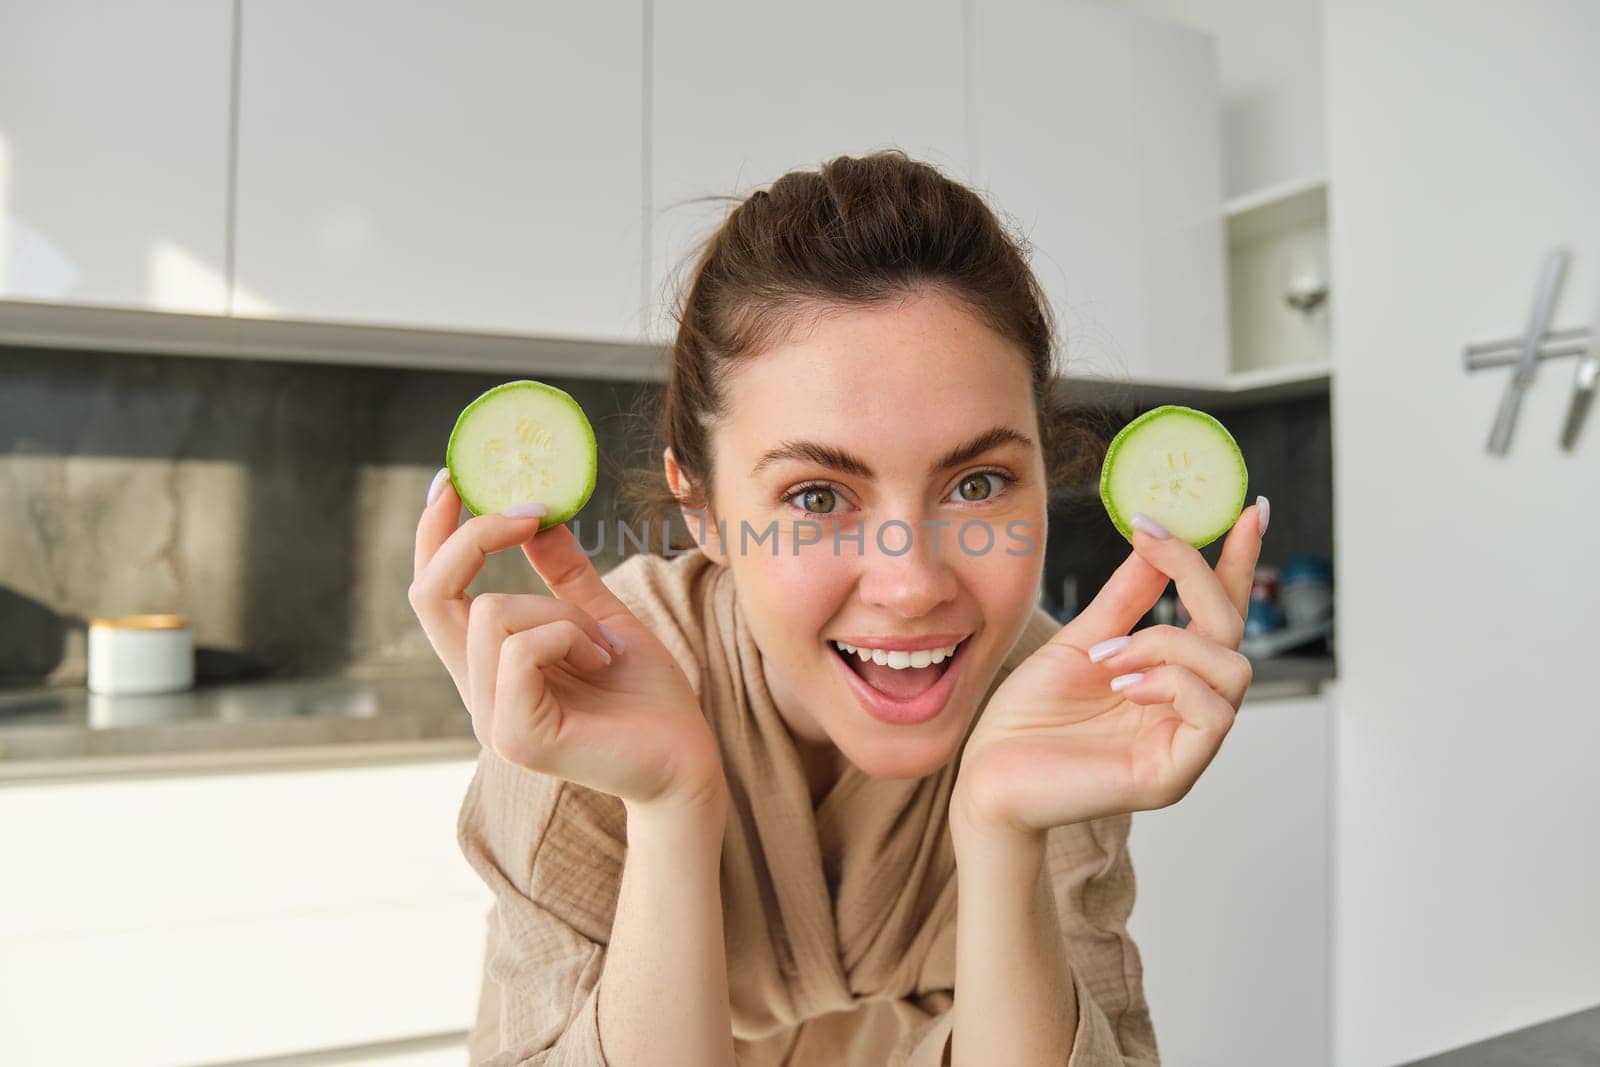 Food and lifestyle concept. Beautiful woman cooking in the kitchen, holding raw zucchini and smiling, preparing healthy vegetarian meal, making salad, looking happy.